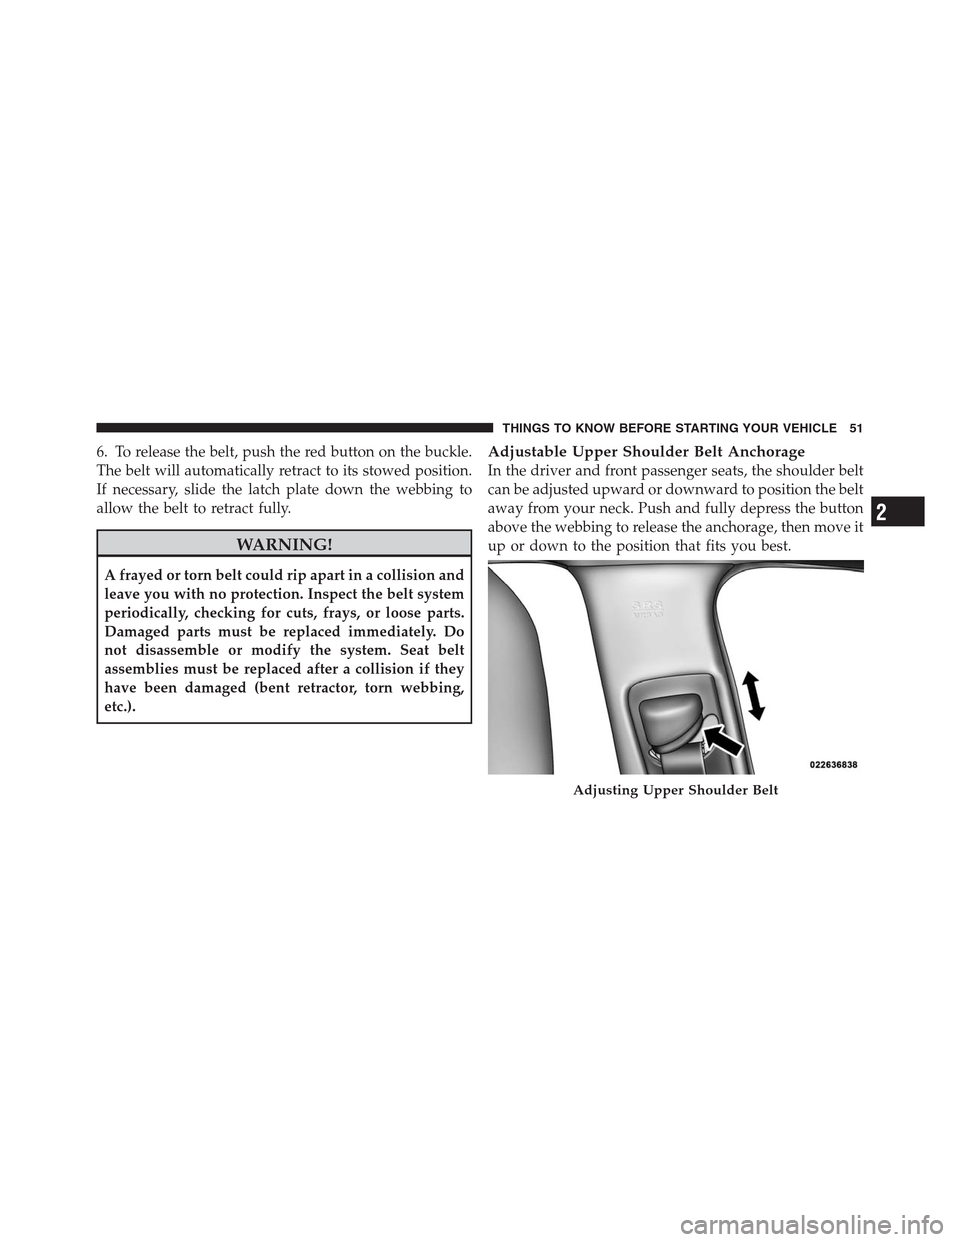 CHRYSLER 300 2012 2.G Workshop Manual 6. To release the belt, push the red button on the buckle.
The belt will automatically retract to its stowed position.
If necessary, slide the latch plate down the webbing to
allow the belt to retract